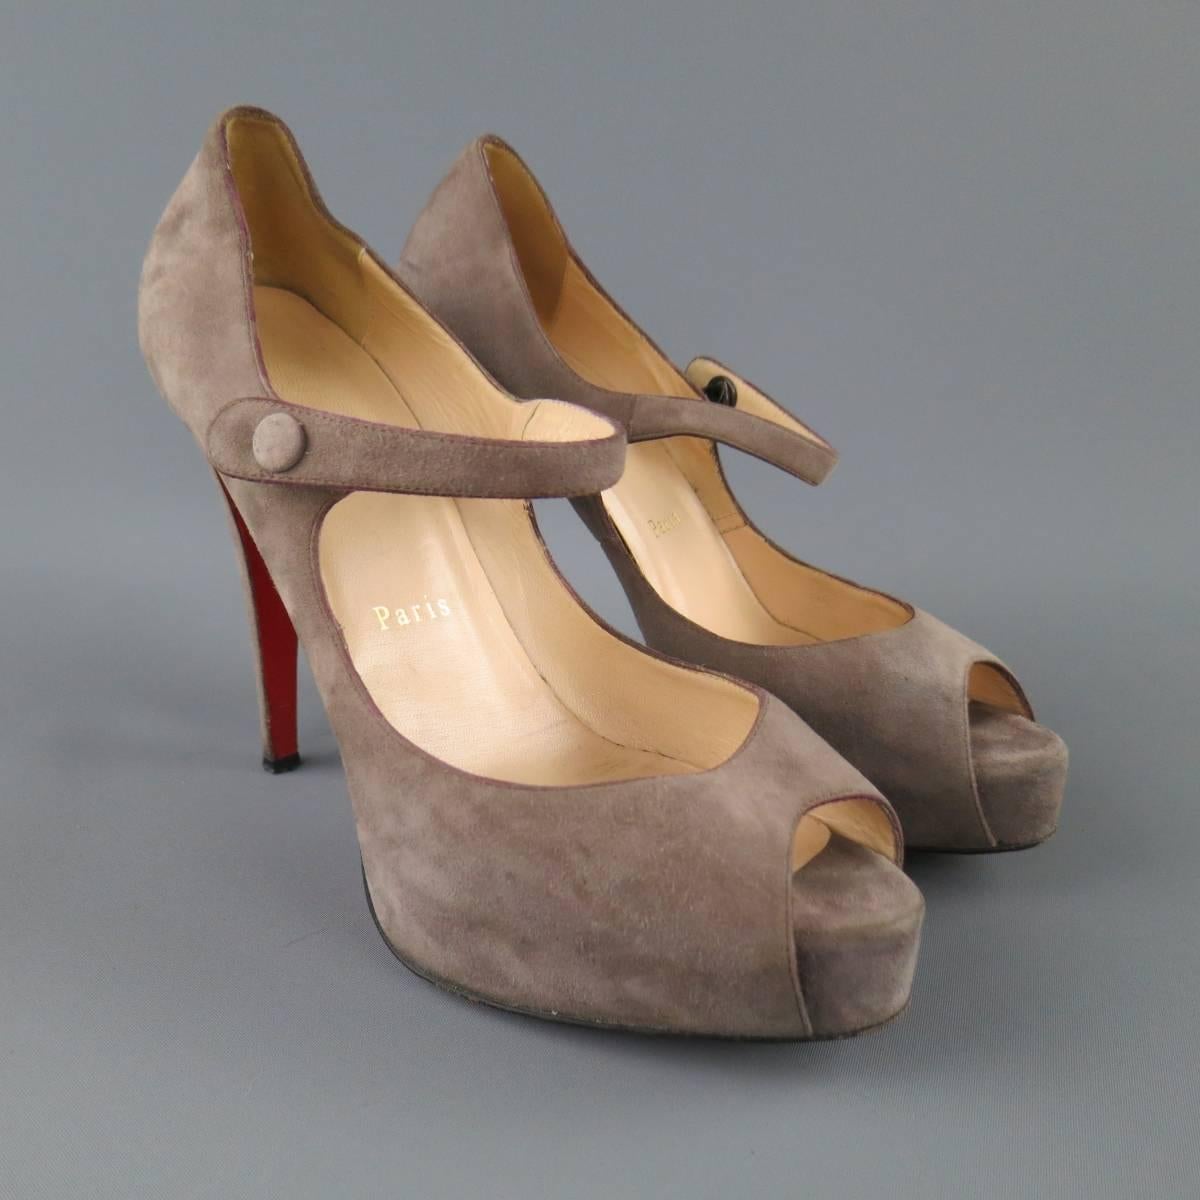 CHRISTIAN LOUBOUTIN pumps in a light taupe gray suede featuring a Mary Jane strap with covered button, peep toe with concealed platform, and covered stiletto heel. Wear throughout. As-Is. Made in Italy.
 
Fair Pre-Owned Condition.
Marked: IT 40
